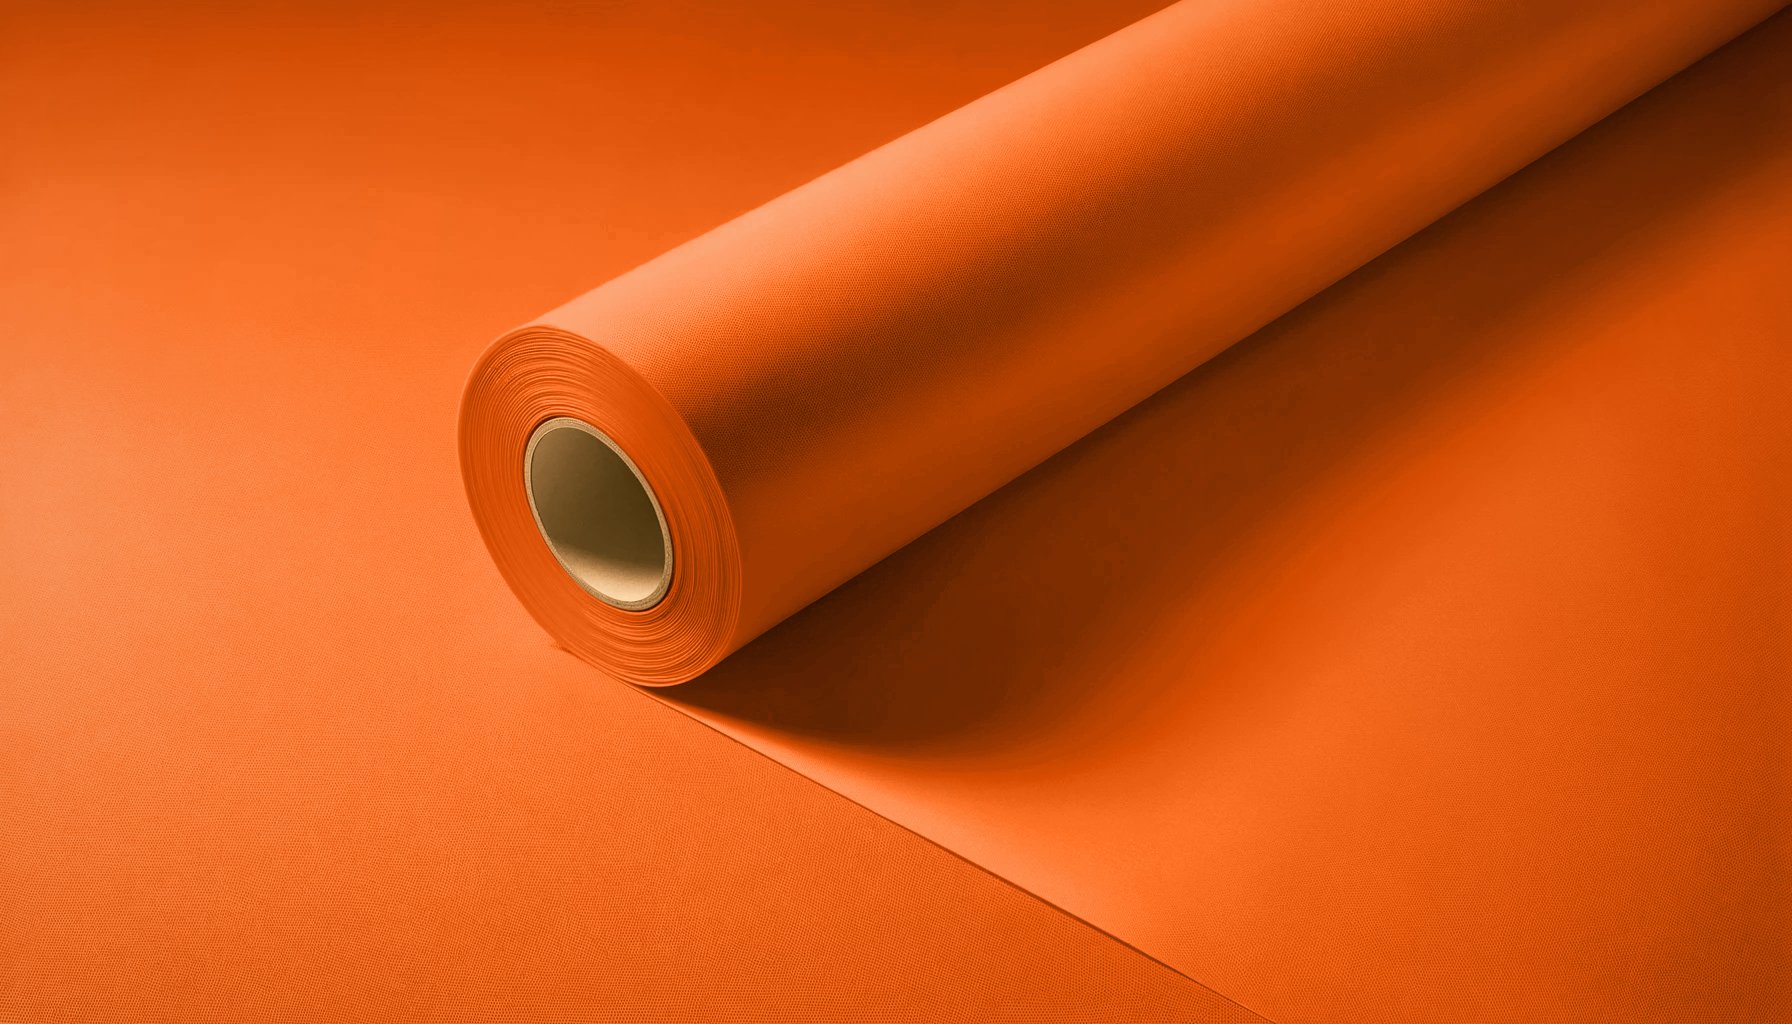 Peel & Stick Removable Re-usable Paint - Color RAL 2009 Traffic Orange - offRAL™ - RALRAW LLC, USA